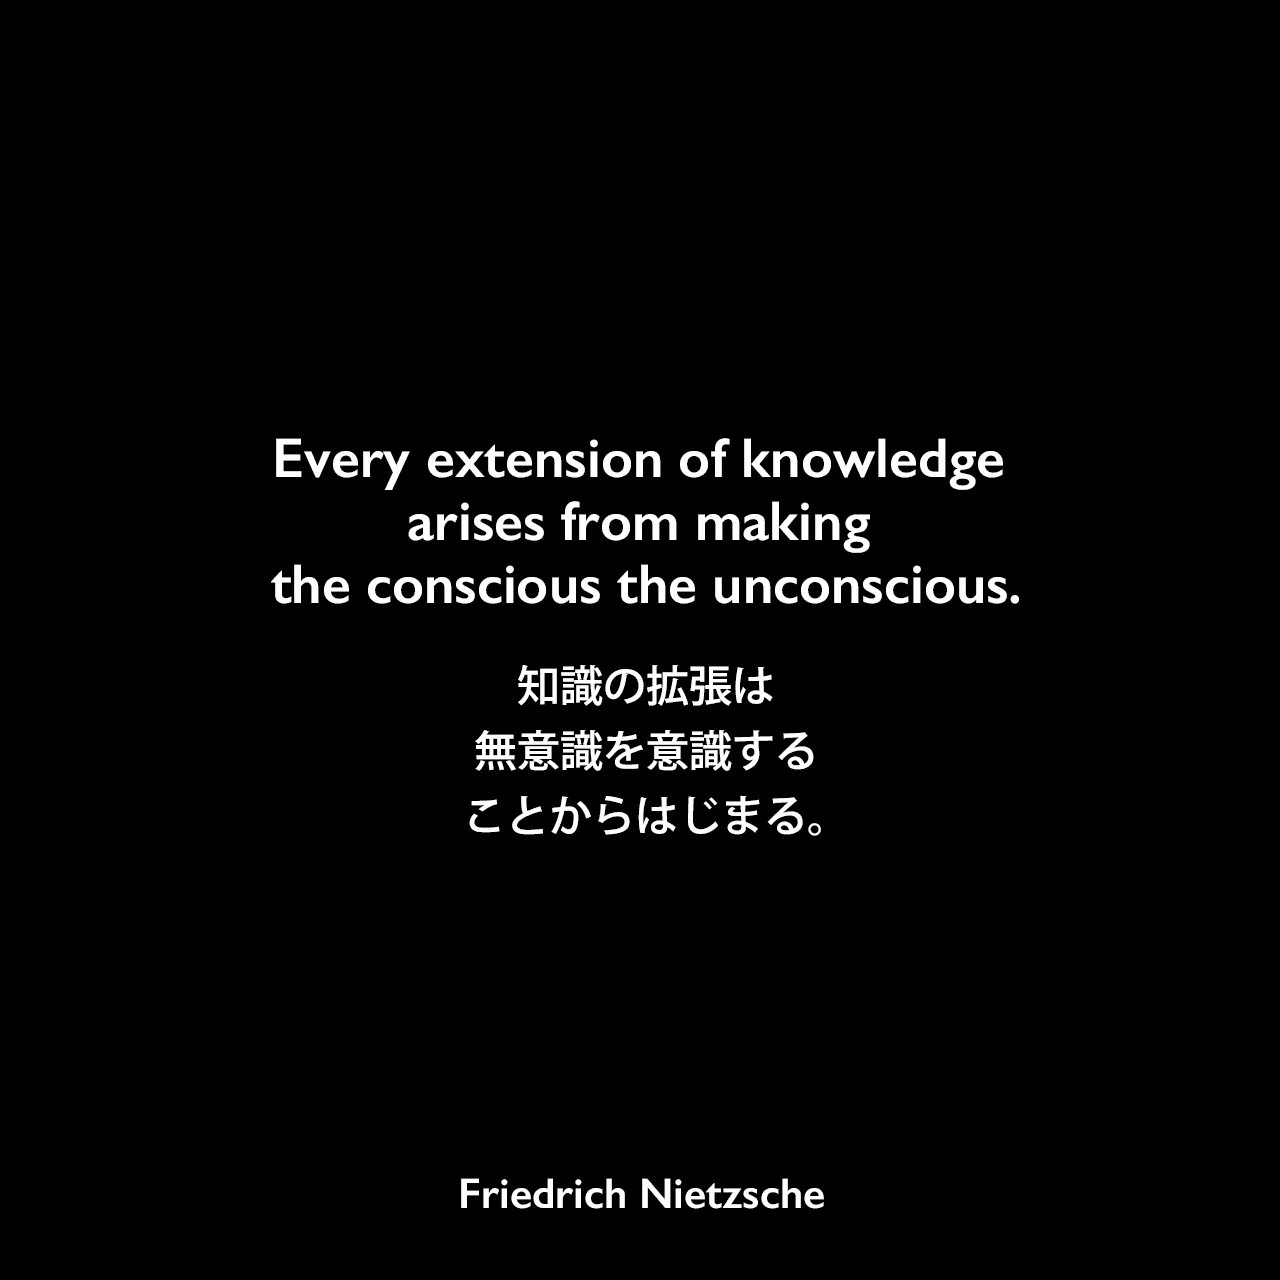 Every extension of knowledge arises from making the conscious the unconscious.知識の拡張は、無意識を意識することからはじまる。Friedrich Nietzsche